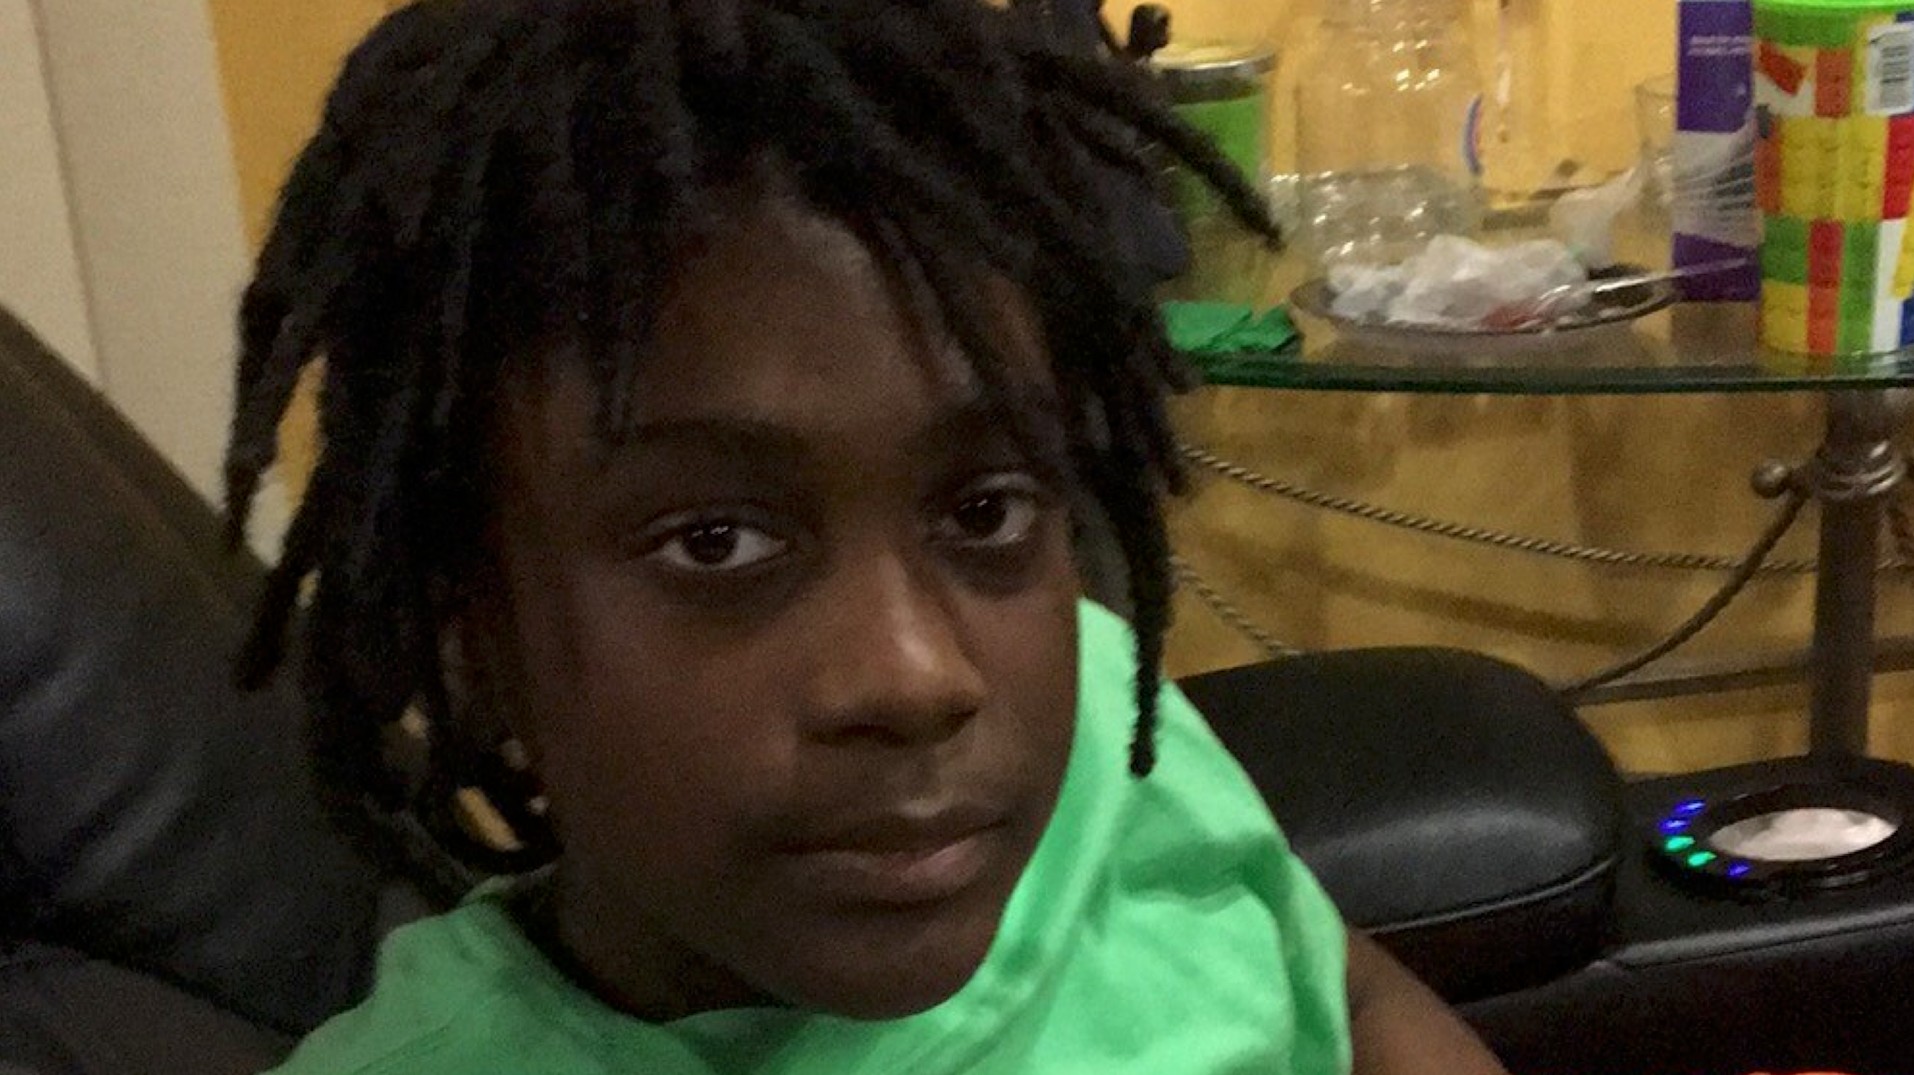 Illinois Mom Files Lawsuit After Police Shot Her 12-Year Old In The Knee During Raid